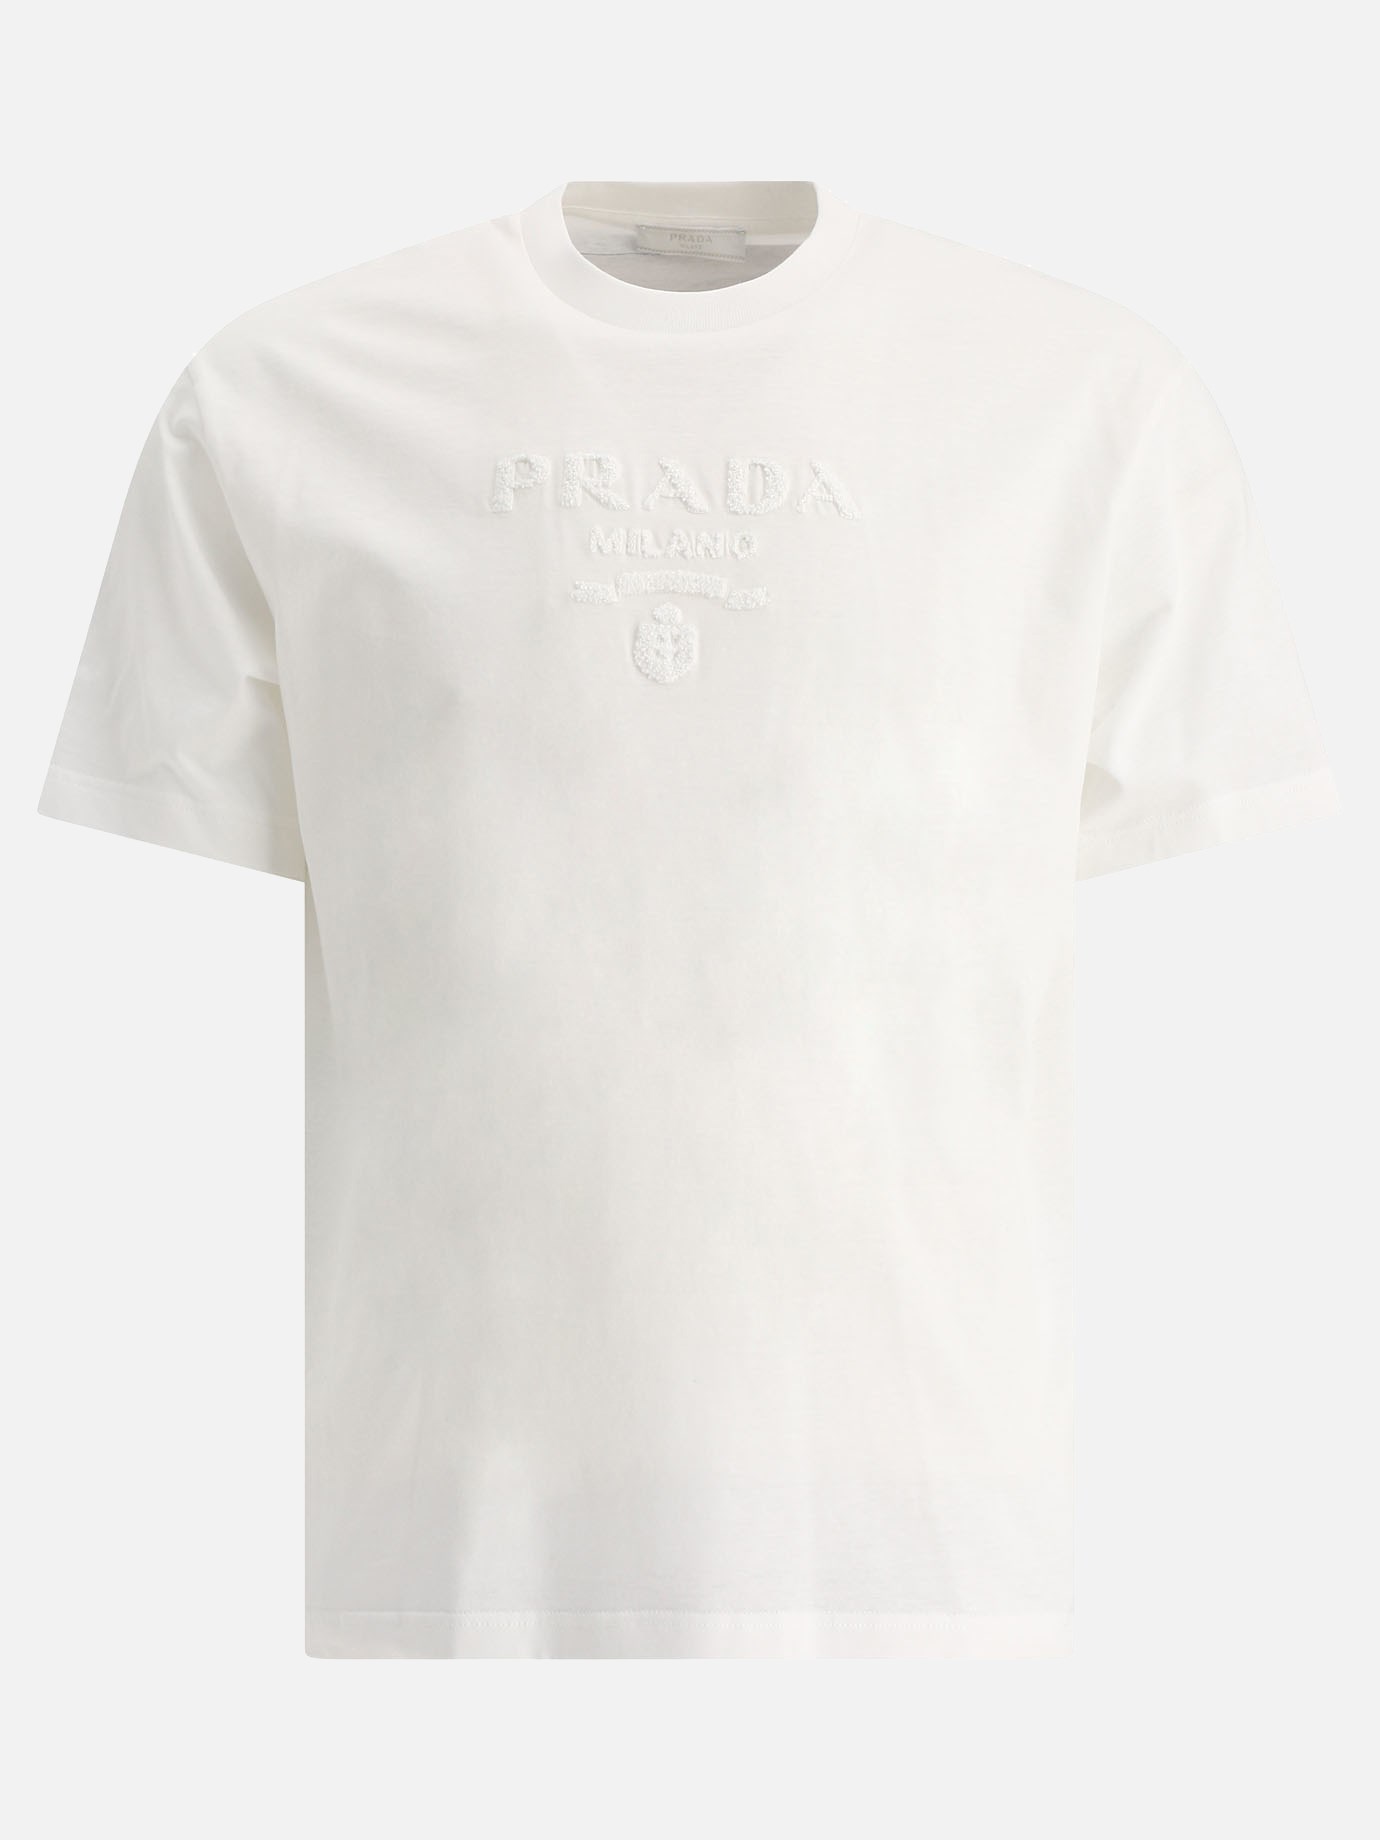 T-shirt with embroidery by Prada